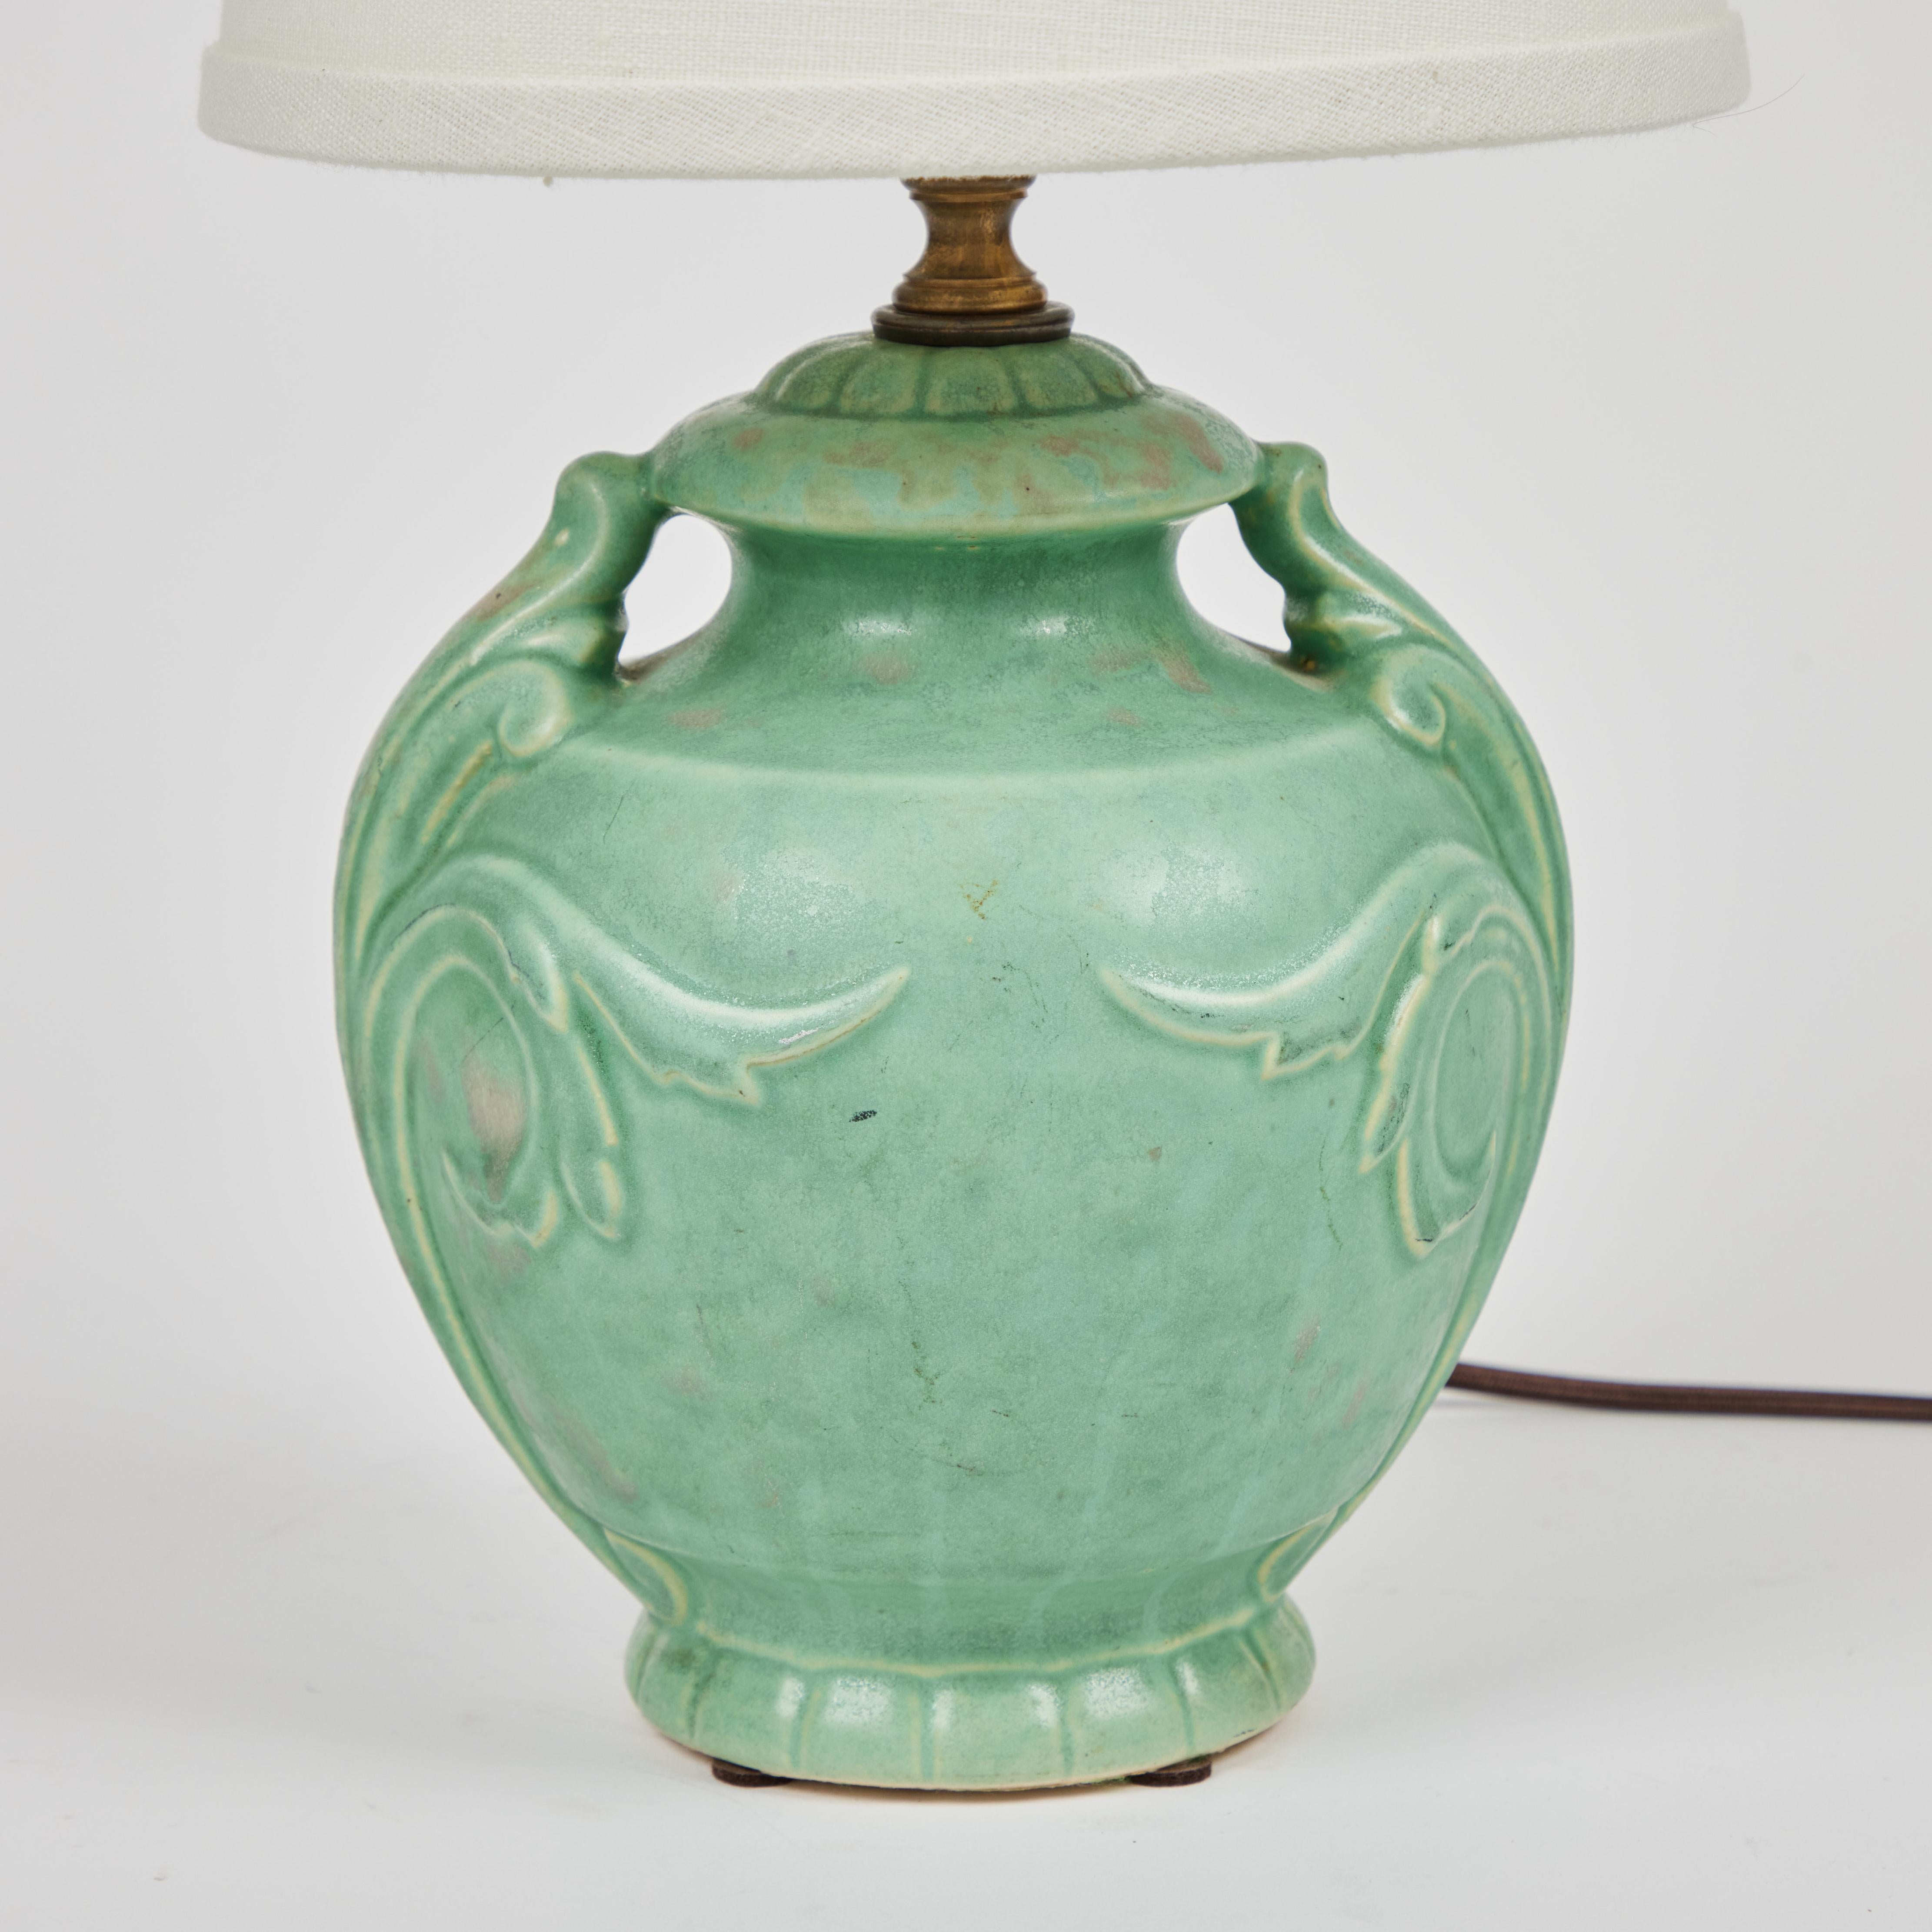 We love this charming 1940's small pottery urn style lamp with a rich matte pale green glaze. It has been newly rewired and has a new custom linen shade.

It measures: 6.5